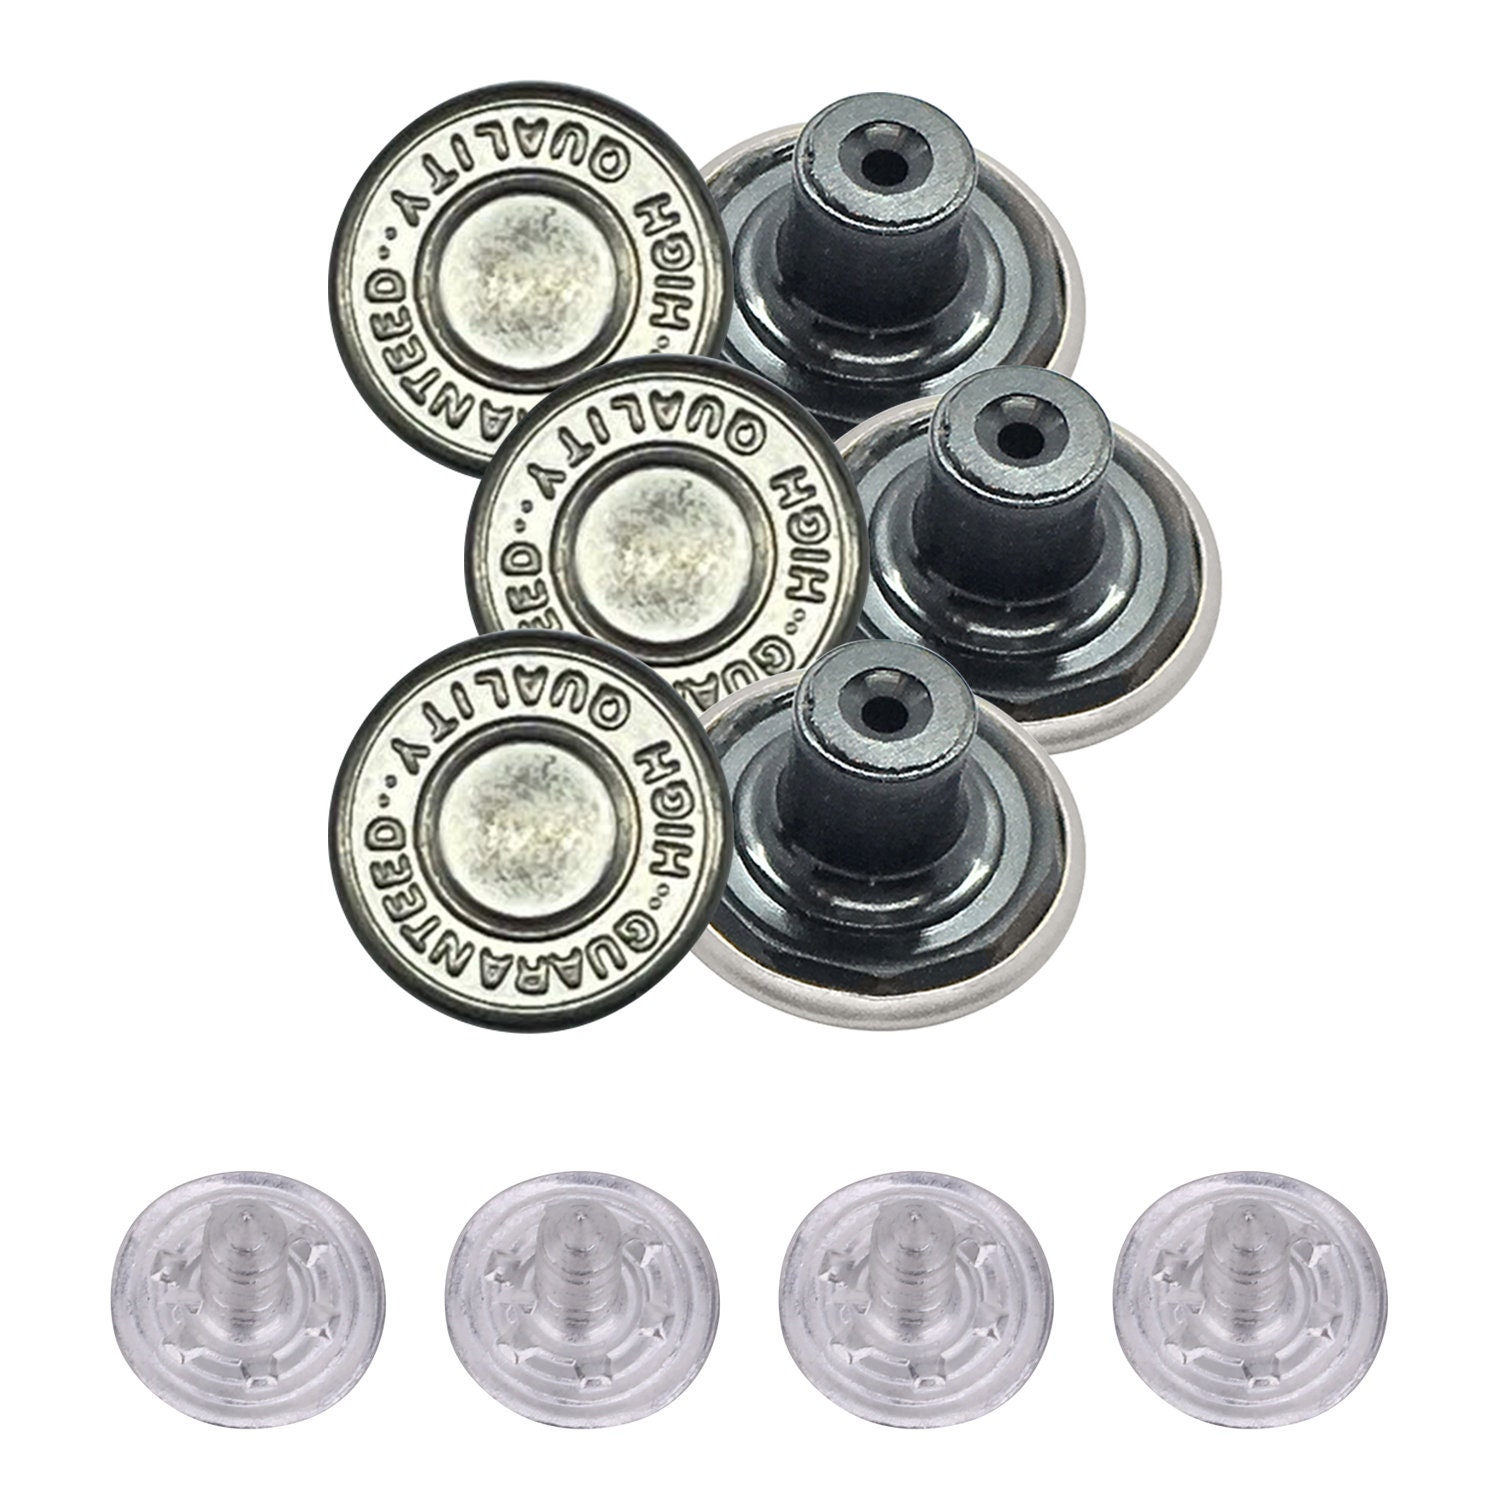 20pcs Hammer on 17mm Jeans Buttons Denim Replacement Brass Stud Jacket  Trousers